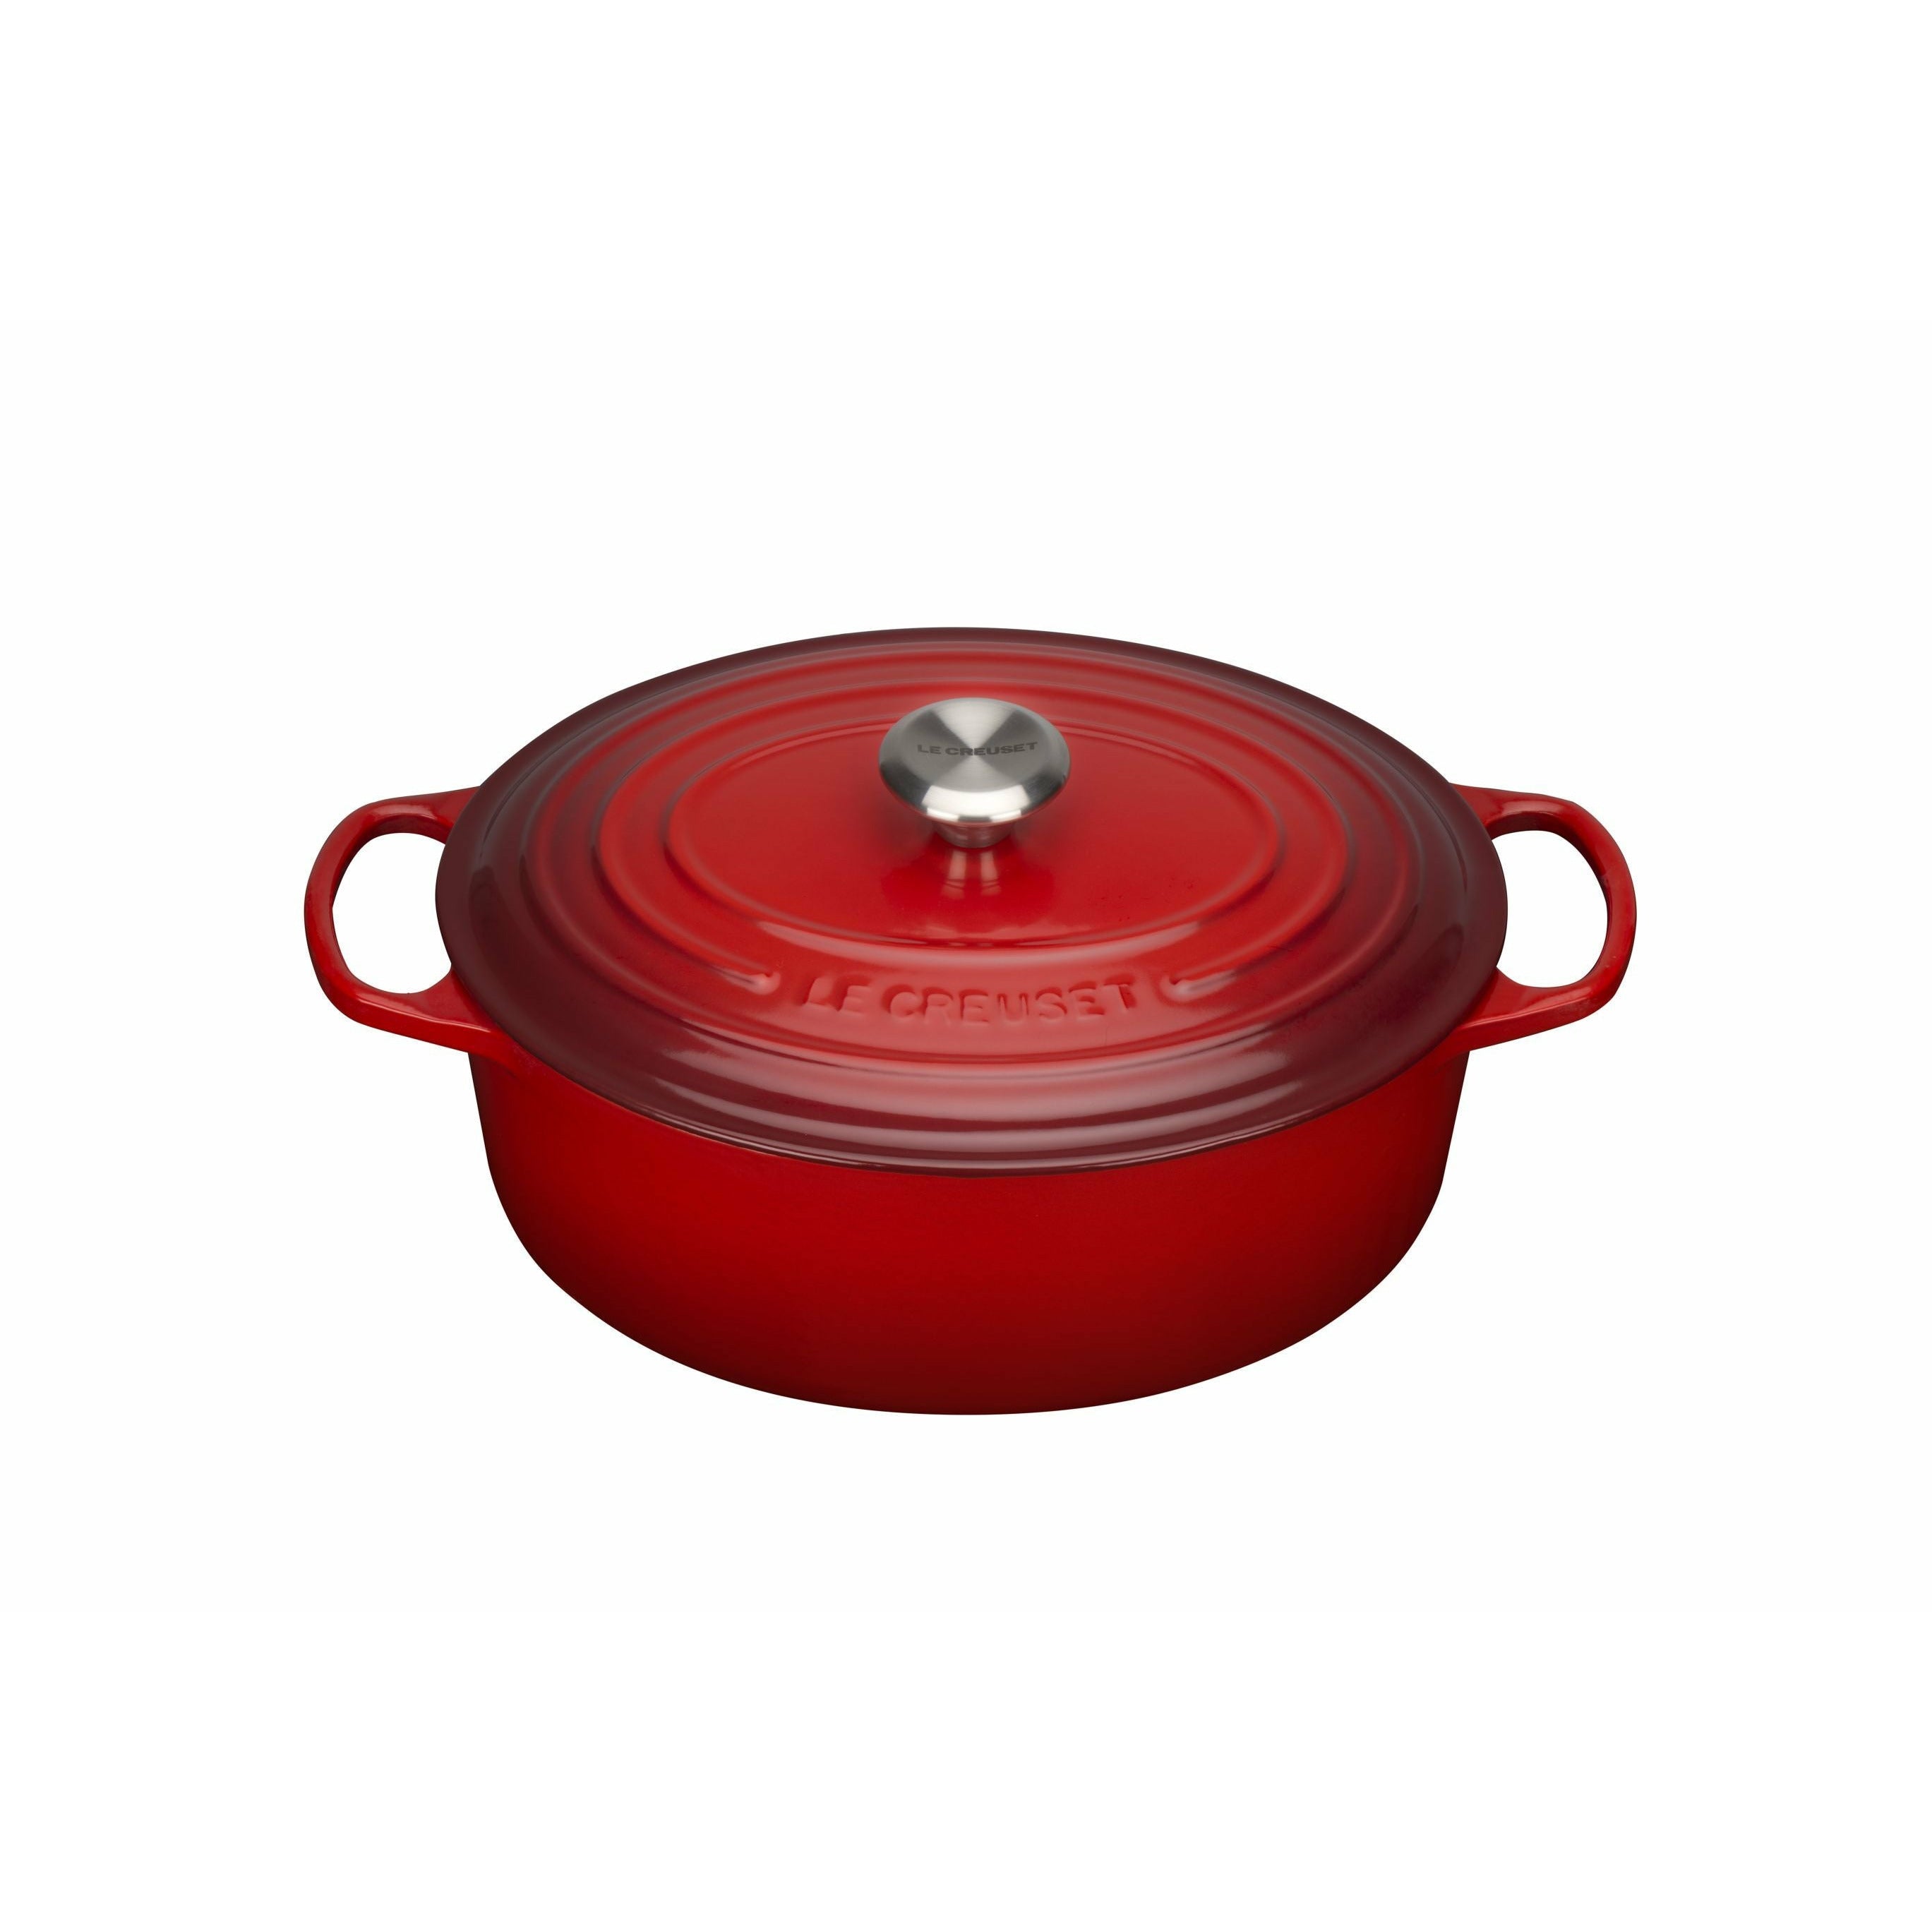 Le Creuset Firma Oval Roaster 31 cm, Cherry Red